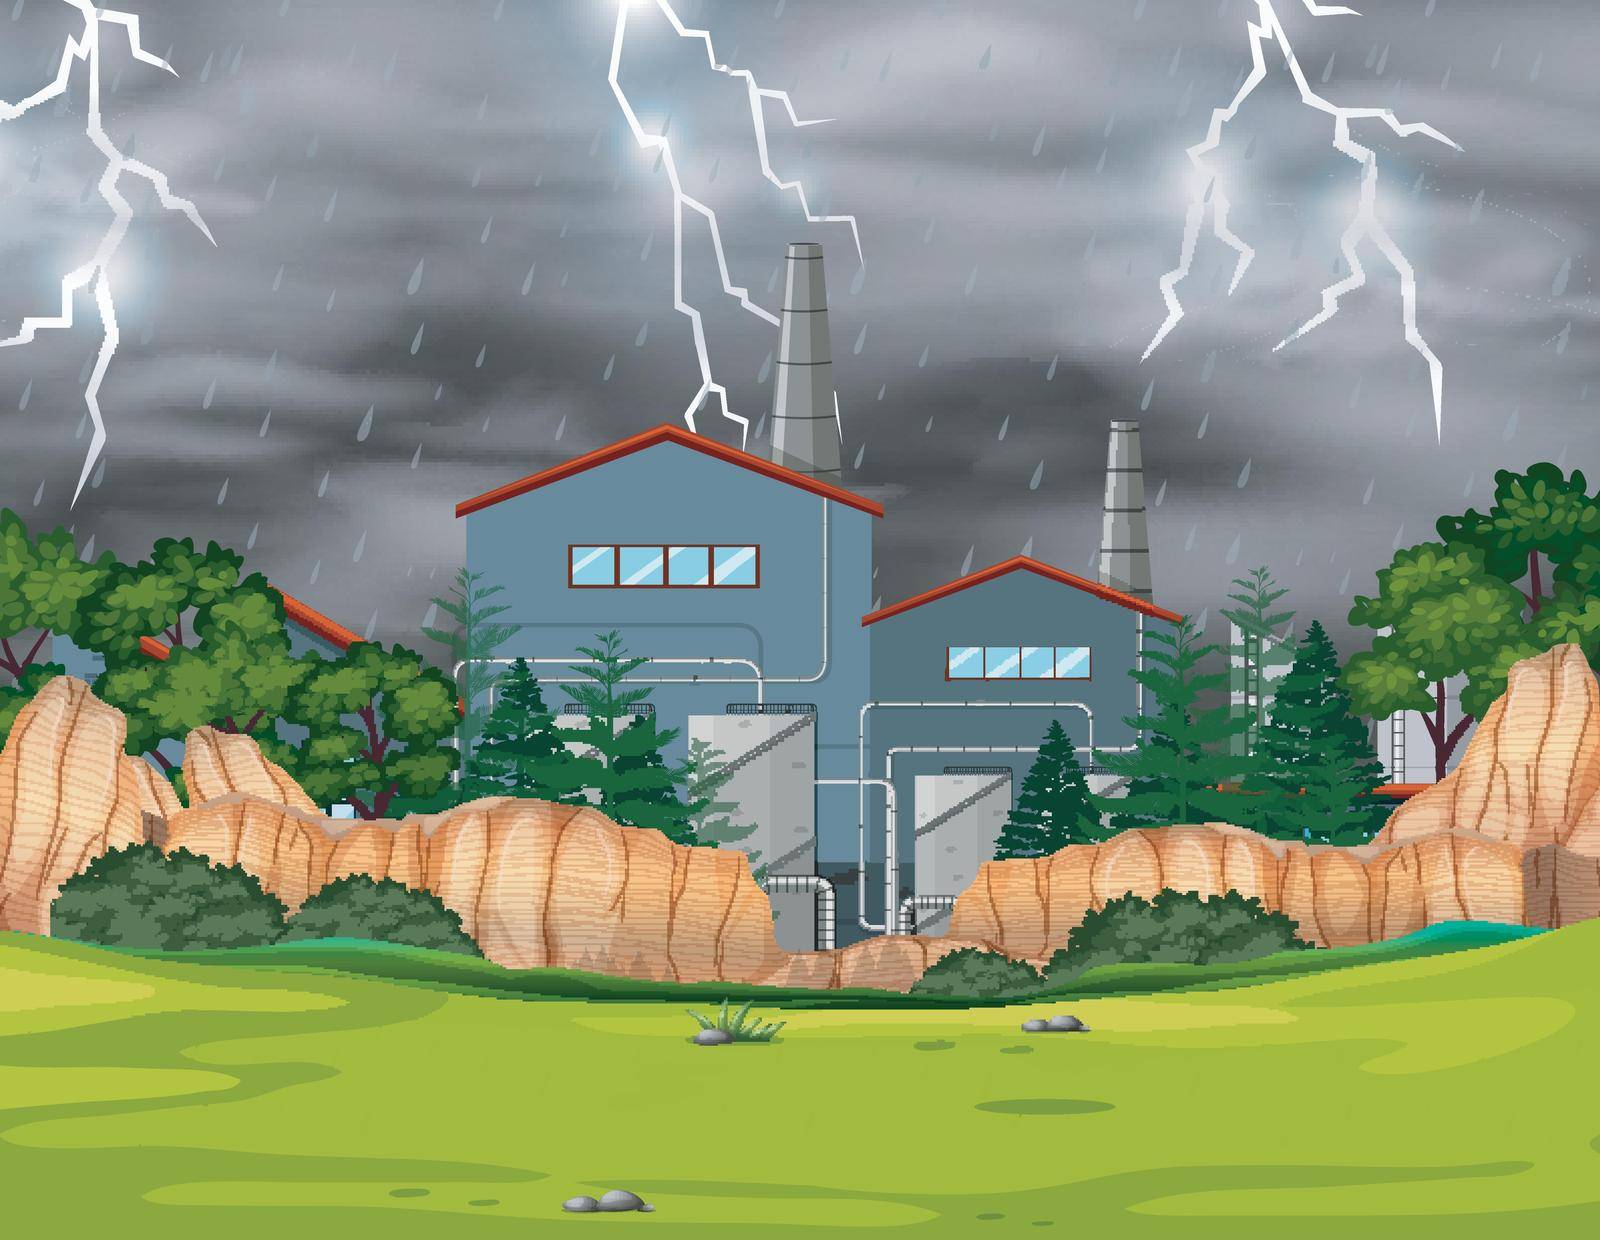 Factory in storm in a park illustration